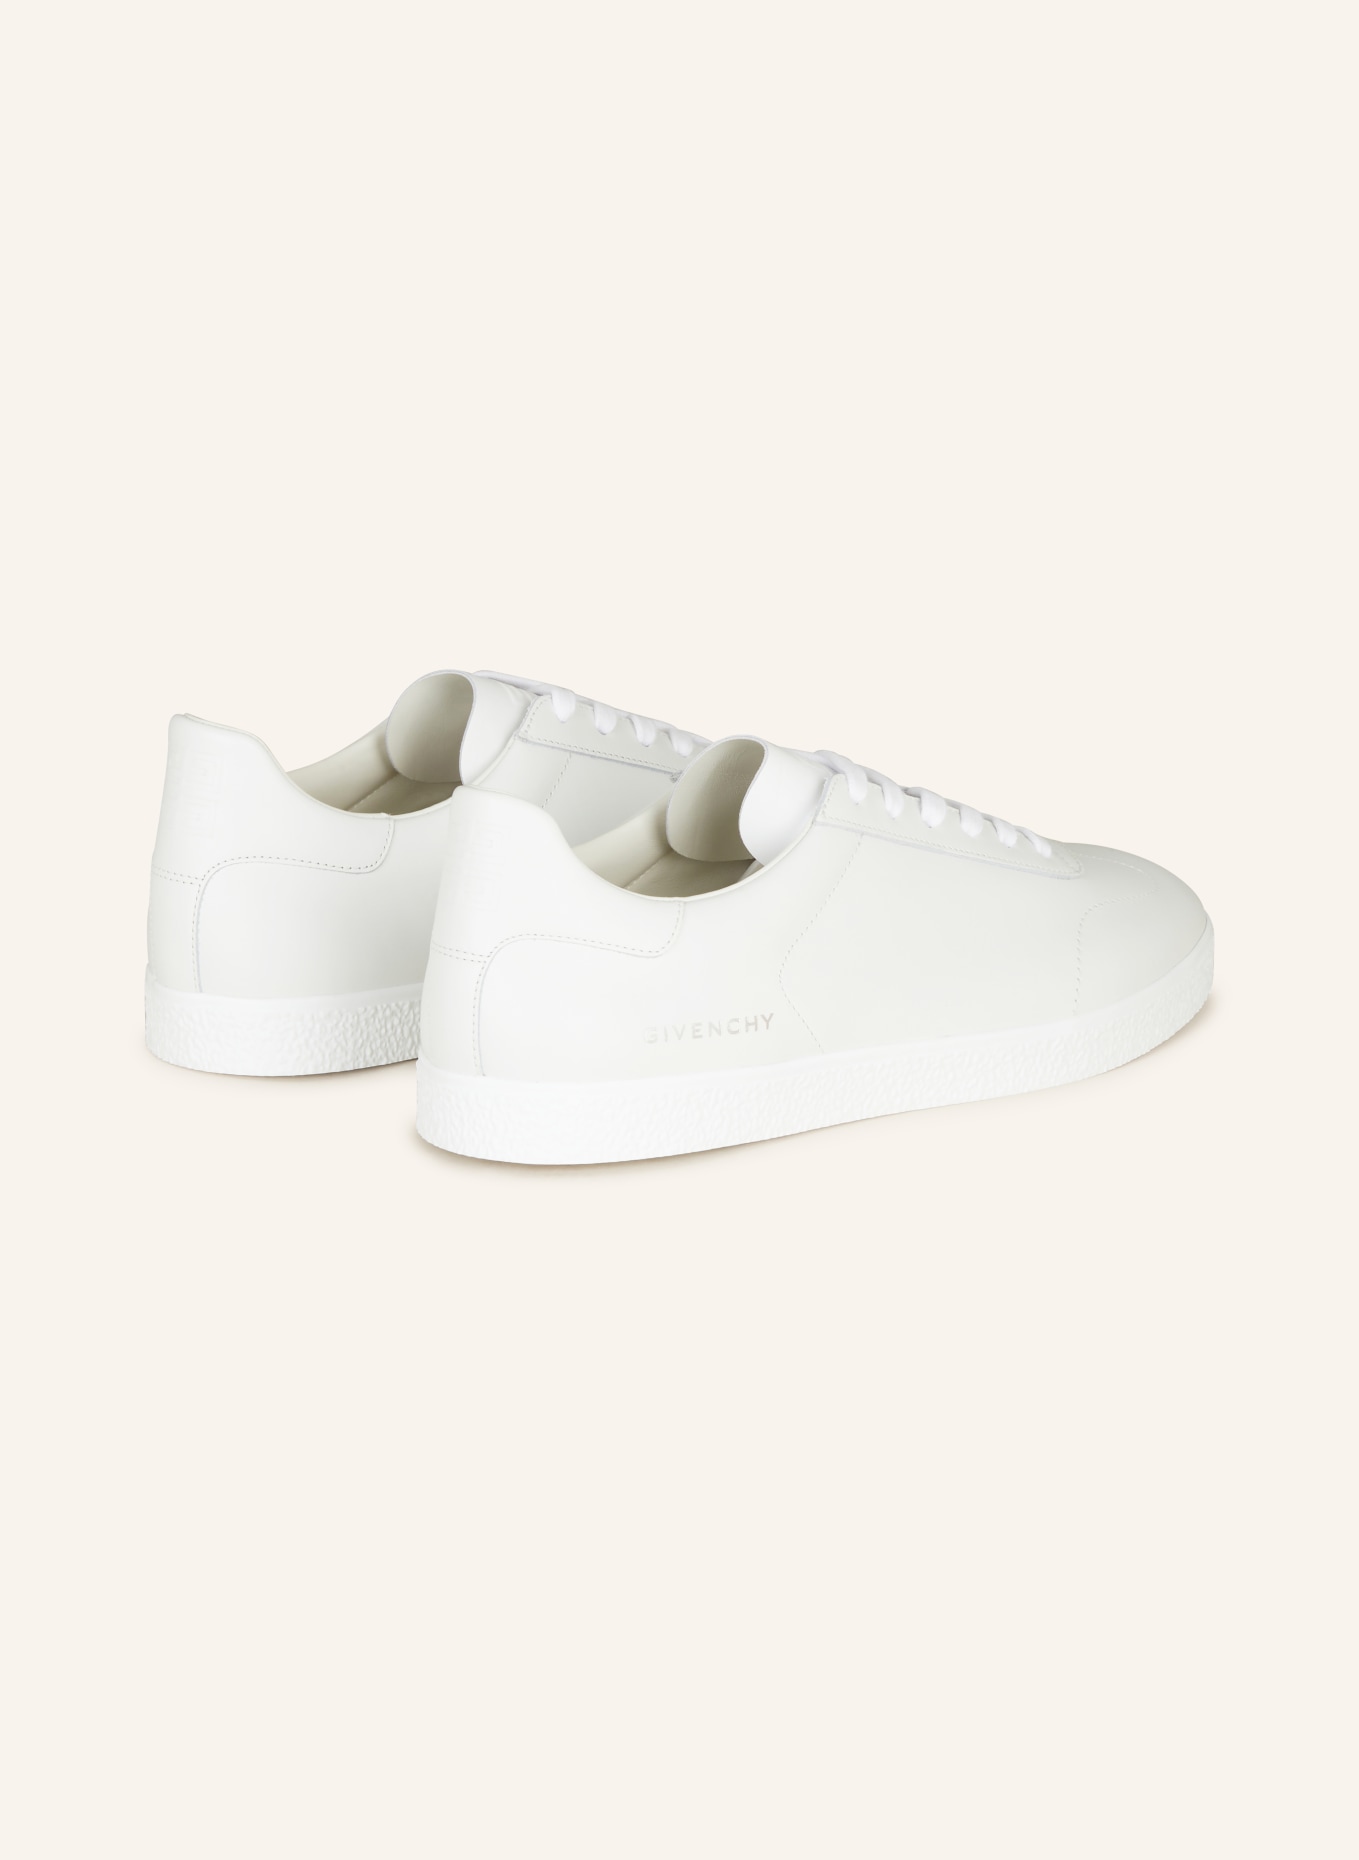 GIVENCHY Sneaker TOWN, Farbe: WEISS (Bild 2)